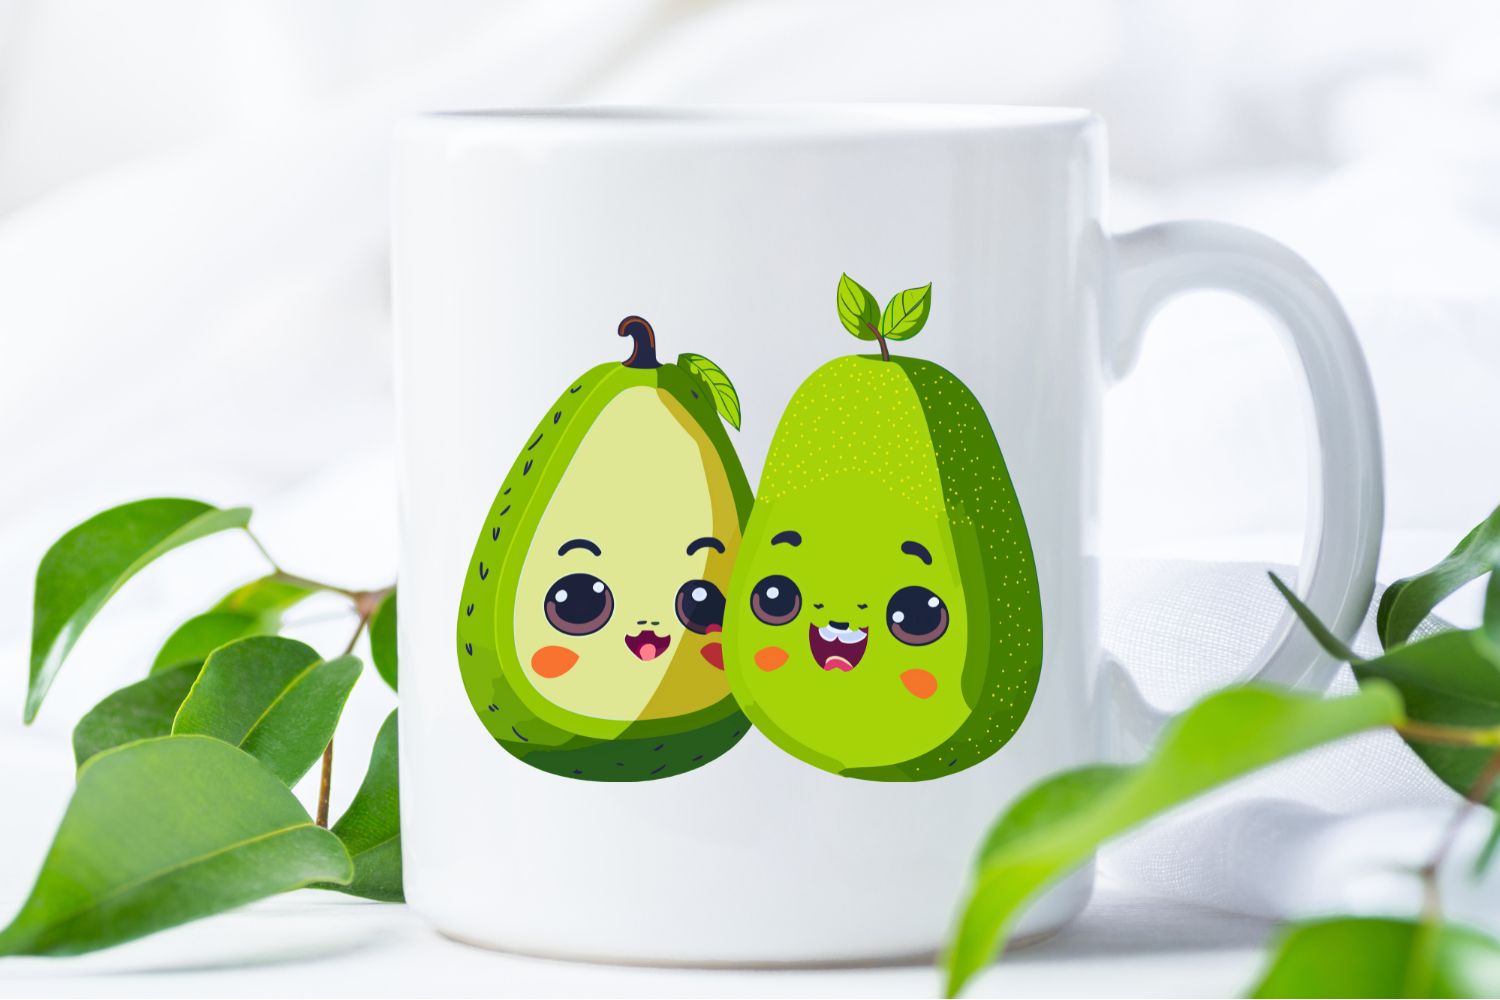 You Are My Other Half, Cute Avocados Travel Mug